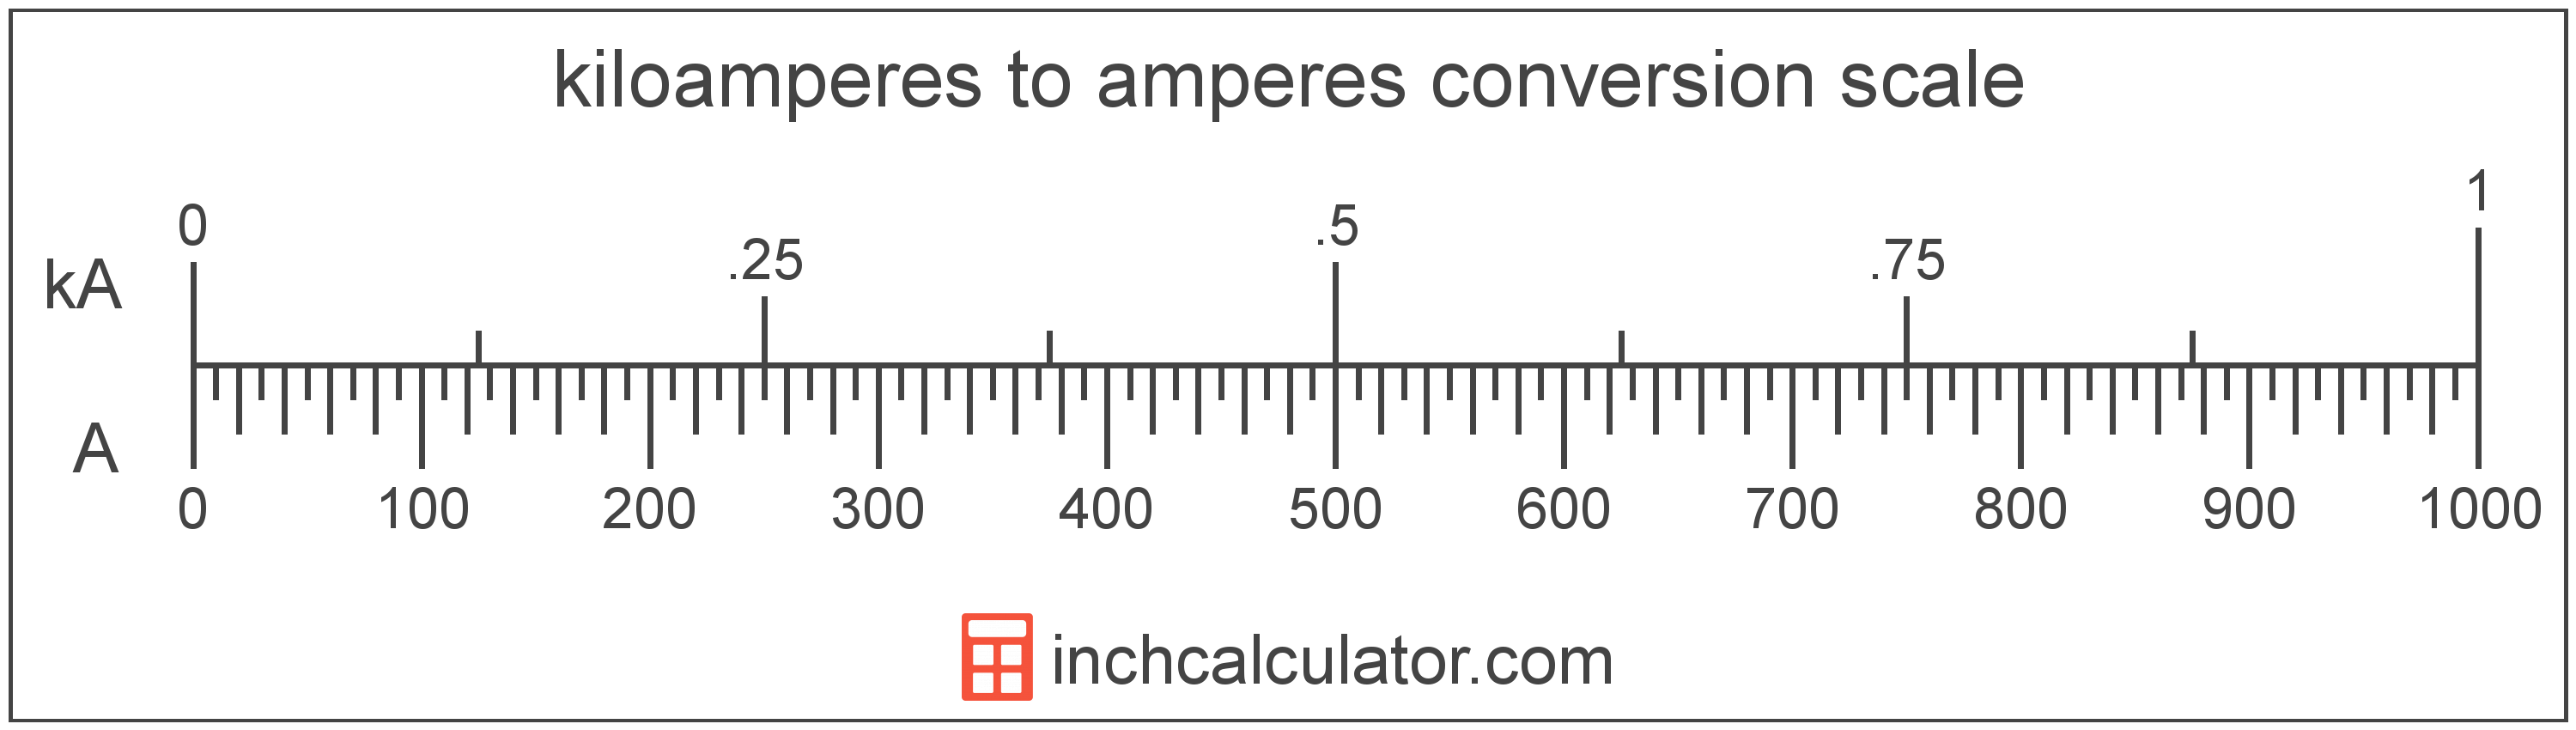 conversion scale showing kiloamperes and equivalent amperes electric current values